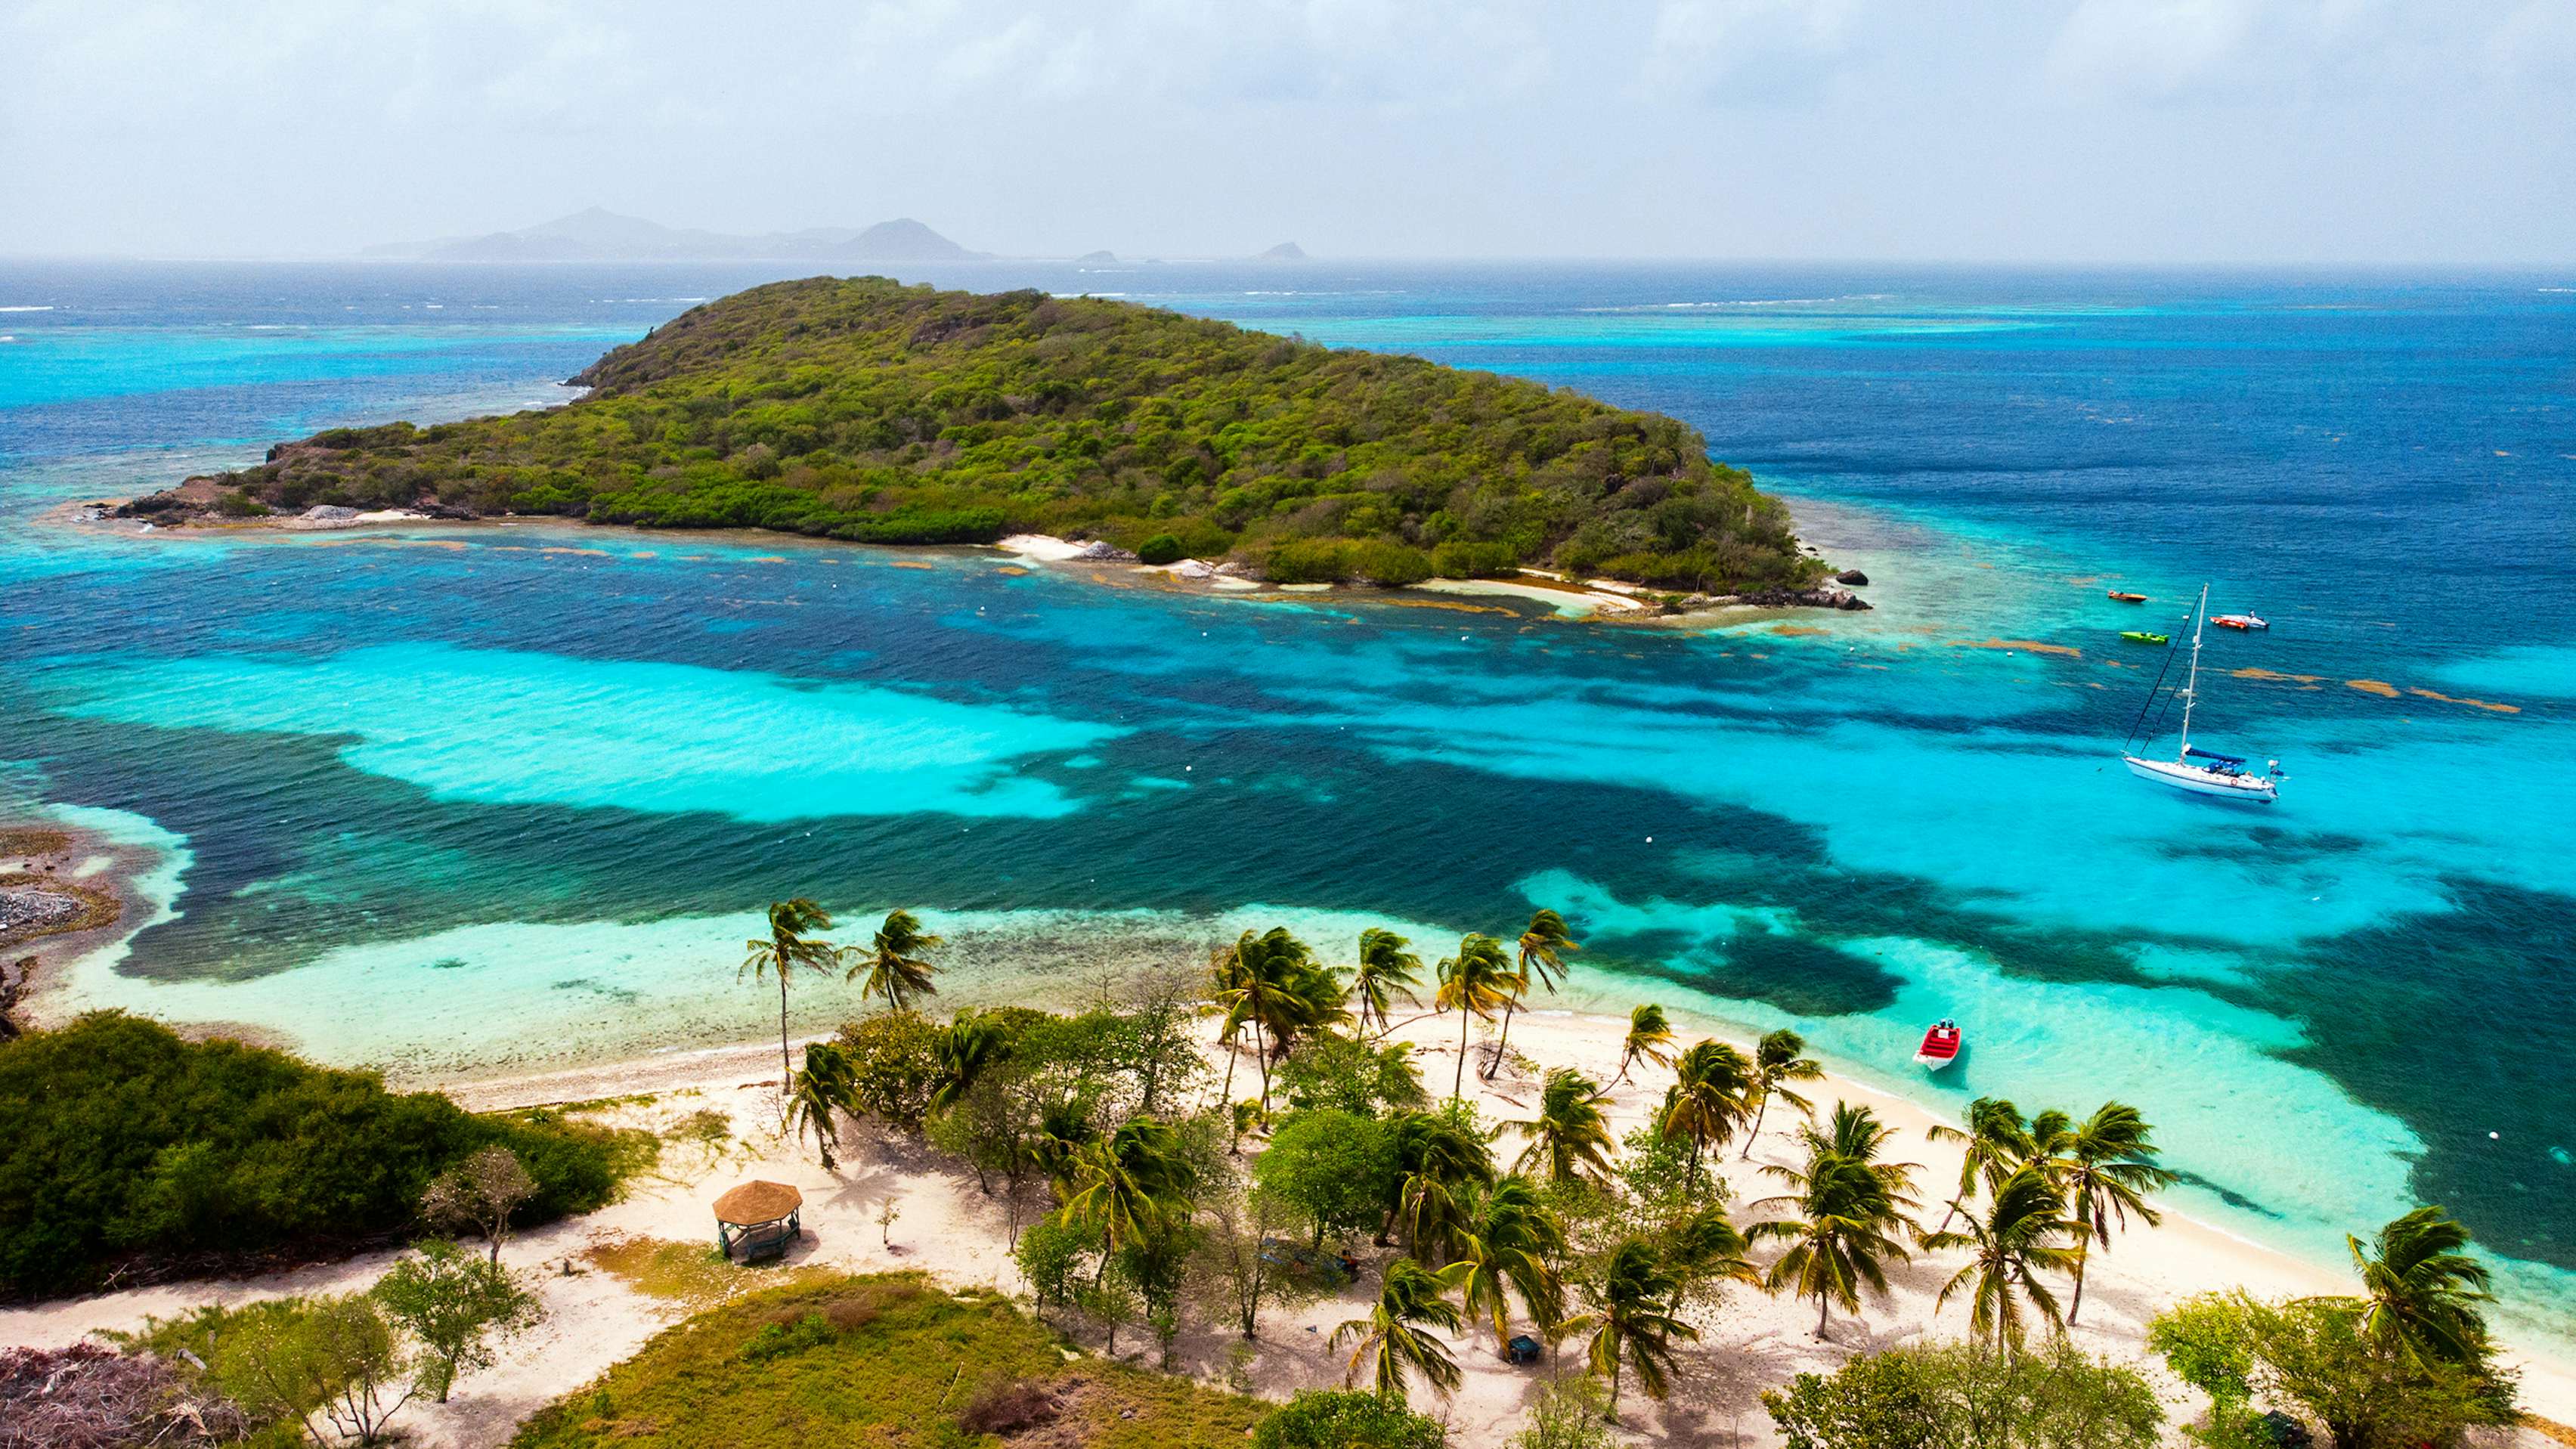 Trinidad & Tobago Yacht Charter - Tobago cays, Caribbean, aerial view of lush beaches and turquoise waters